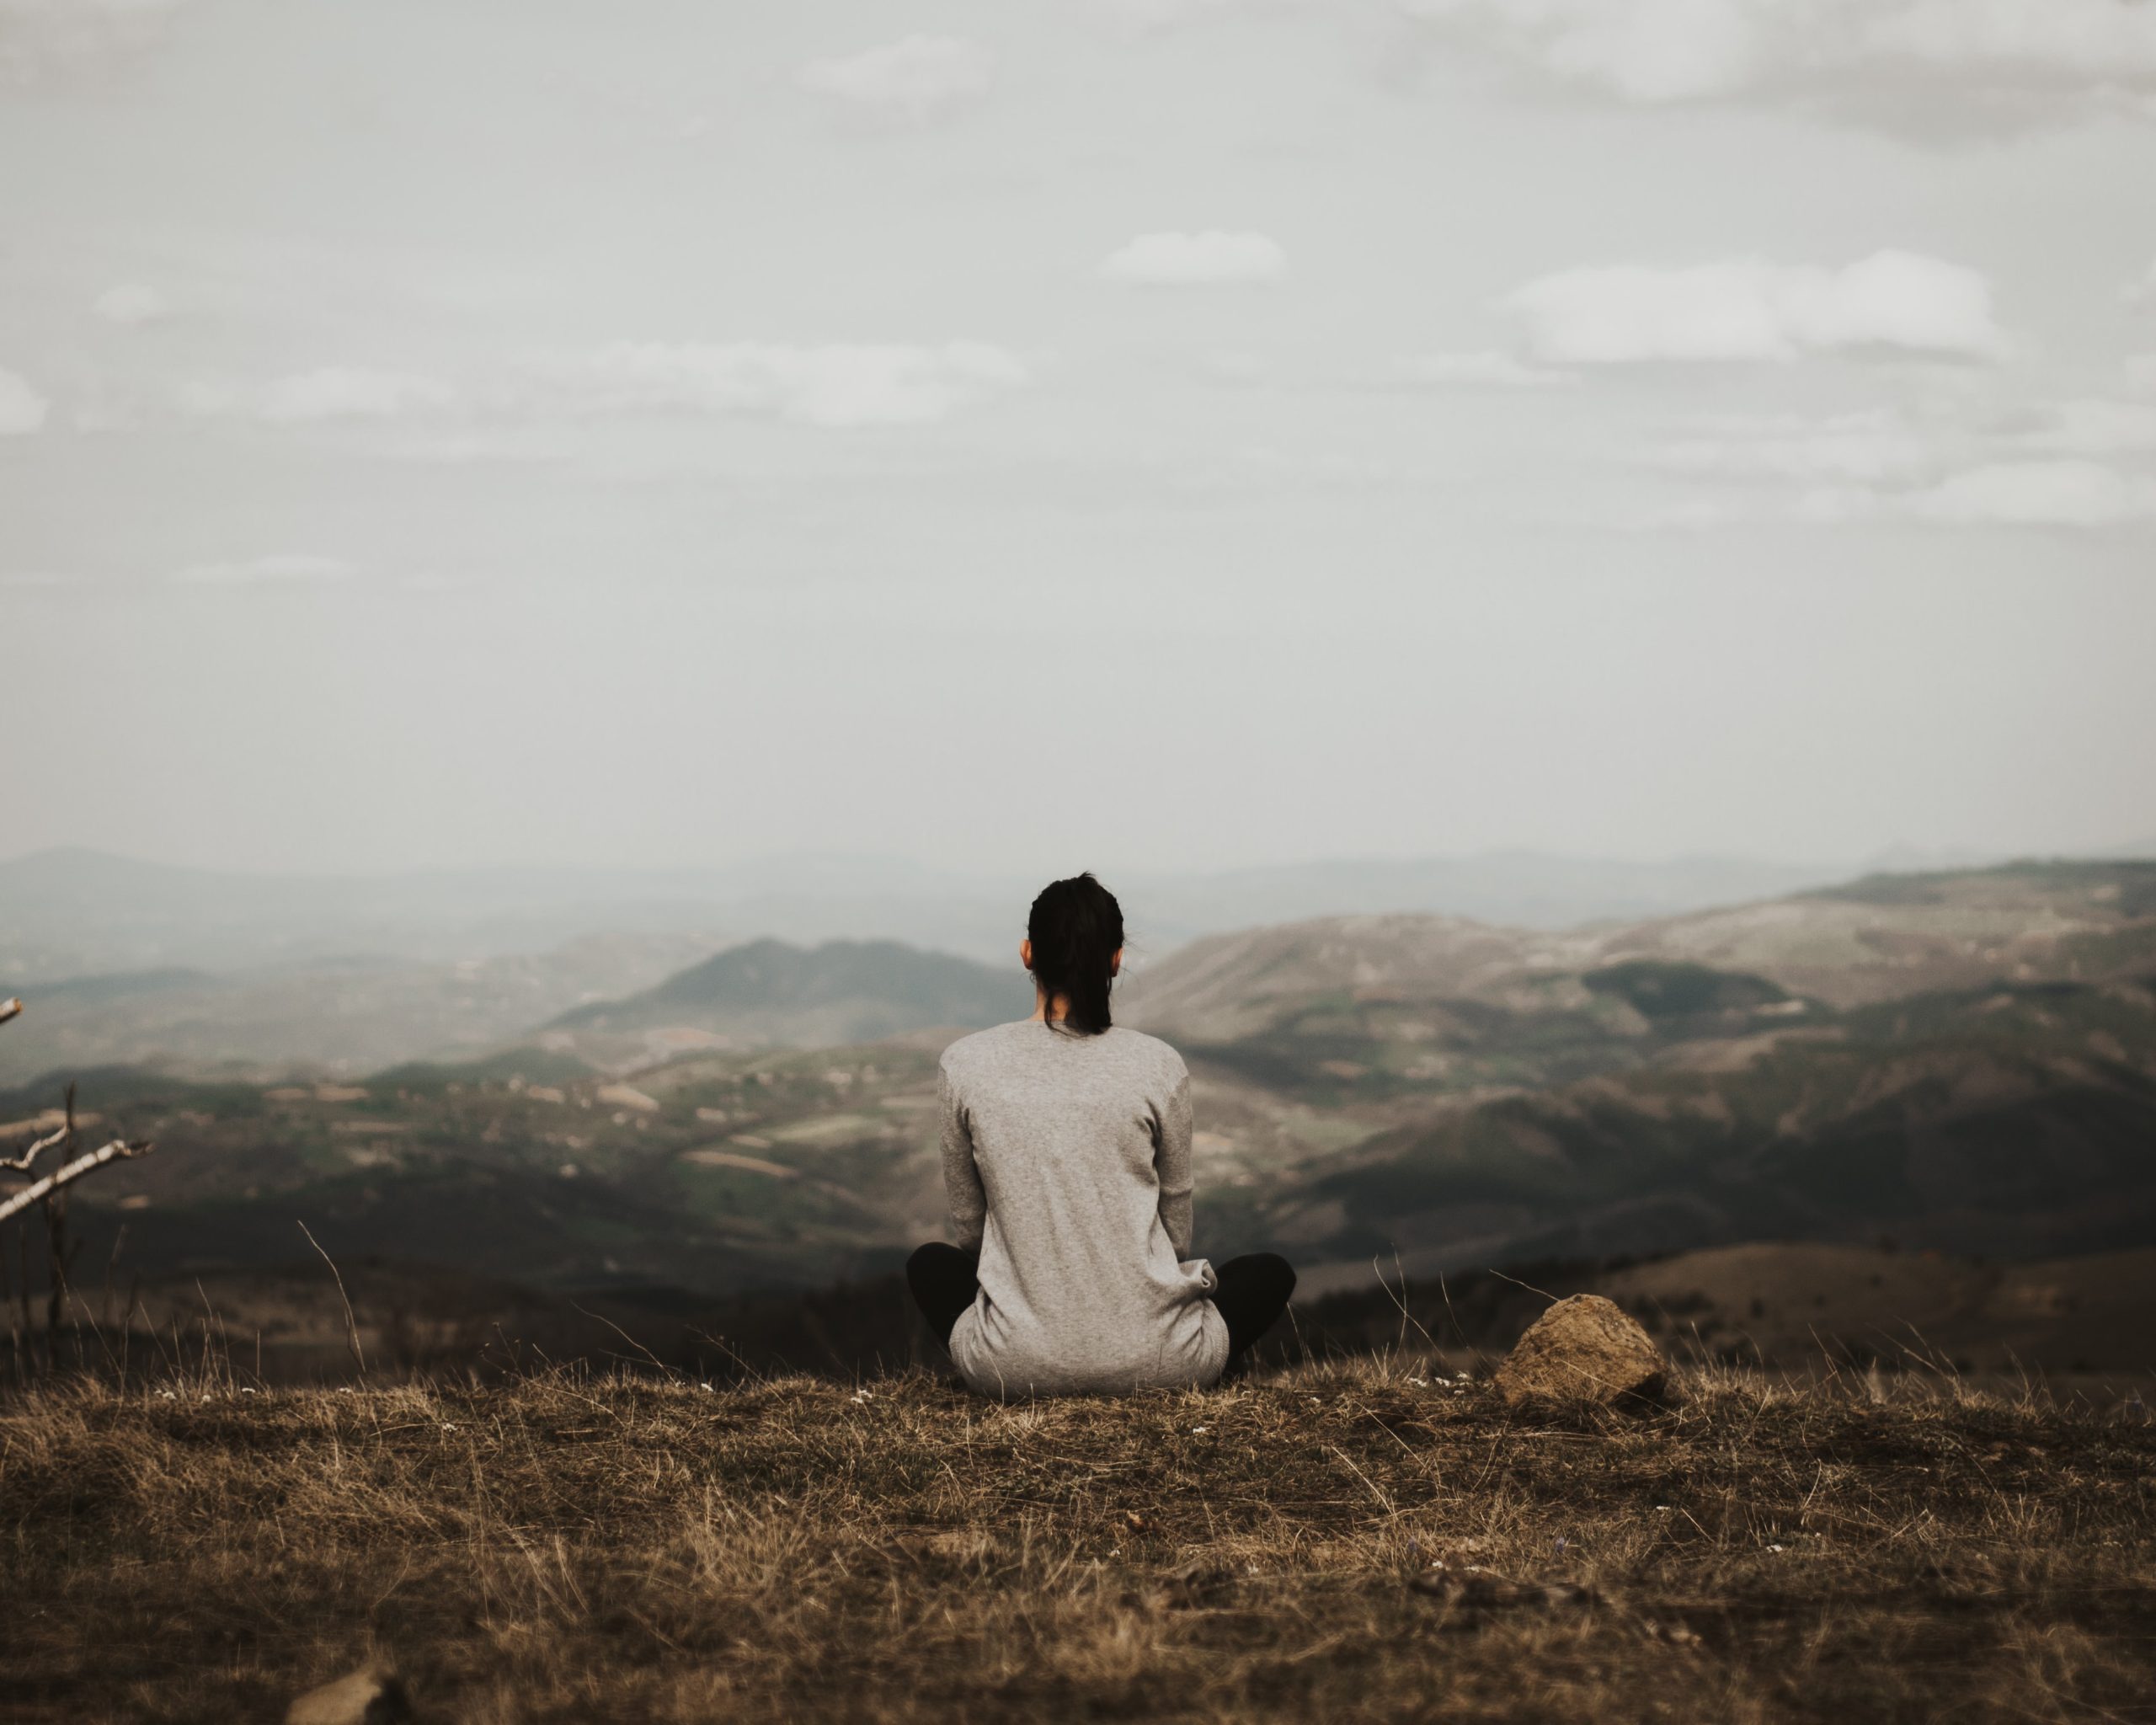 Caucasian woman in a white long tshirt with dark hair is sitting on a brown tinged hill looking at mountains in the distance. Article about empathy for the earth